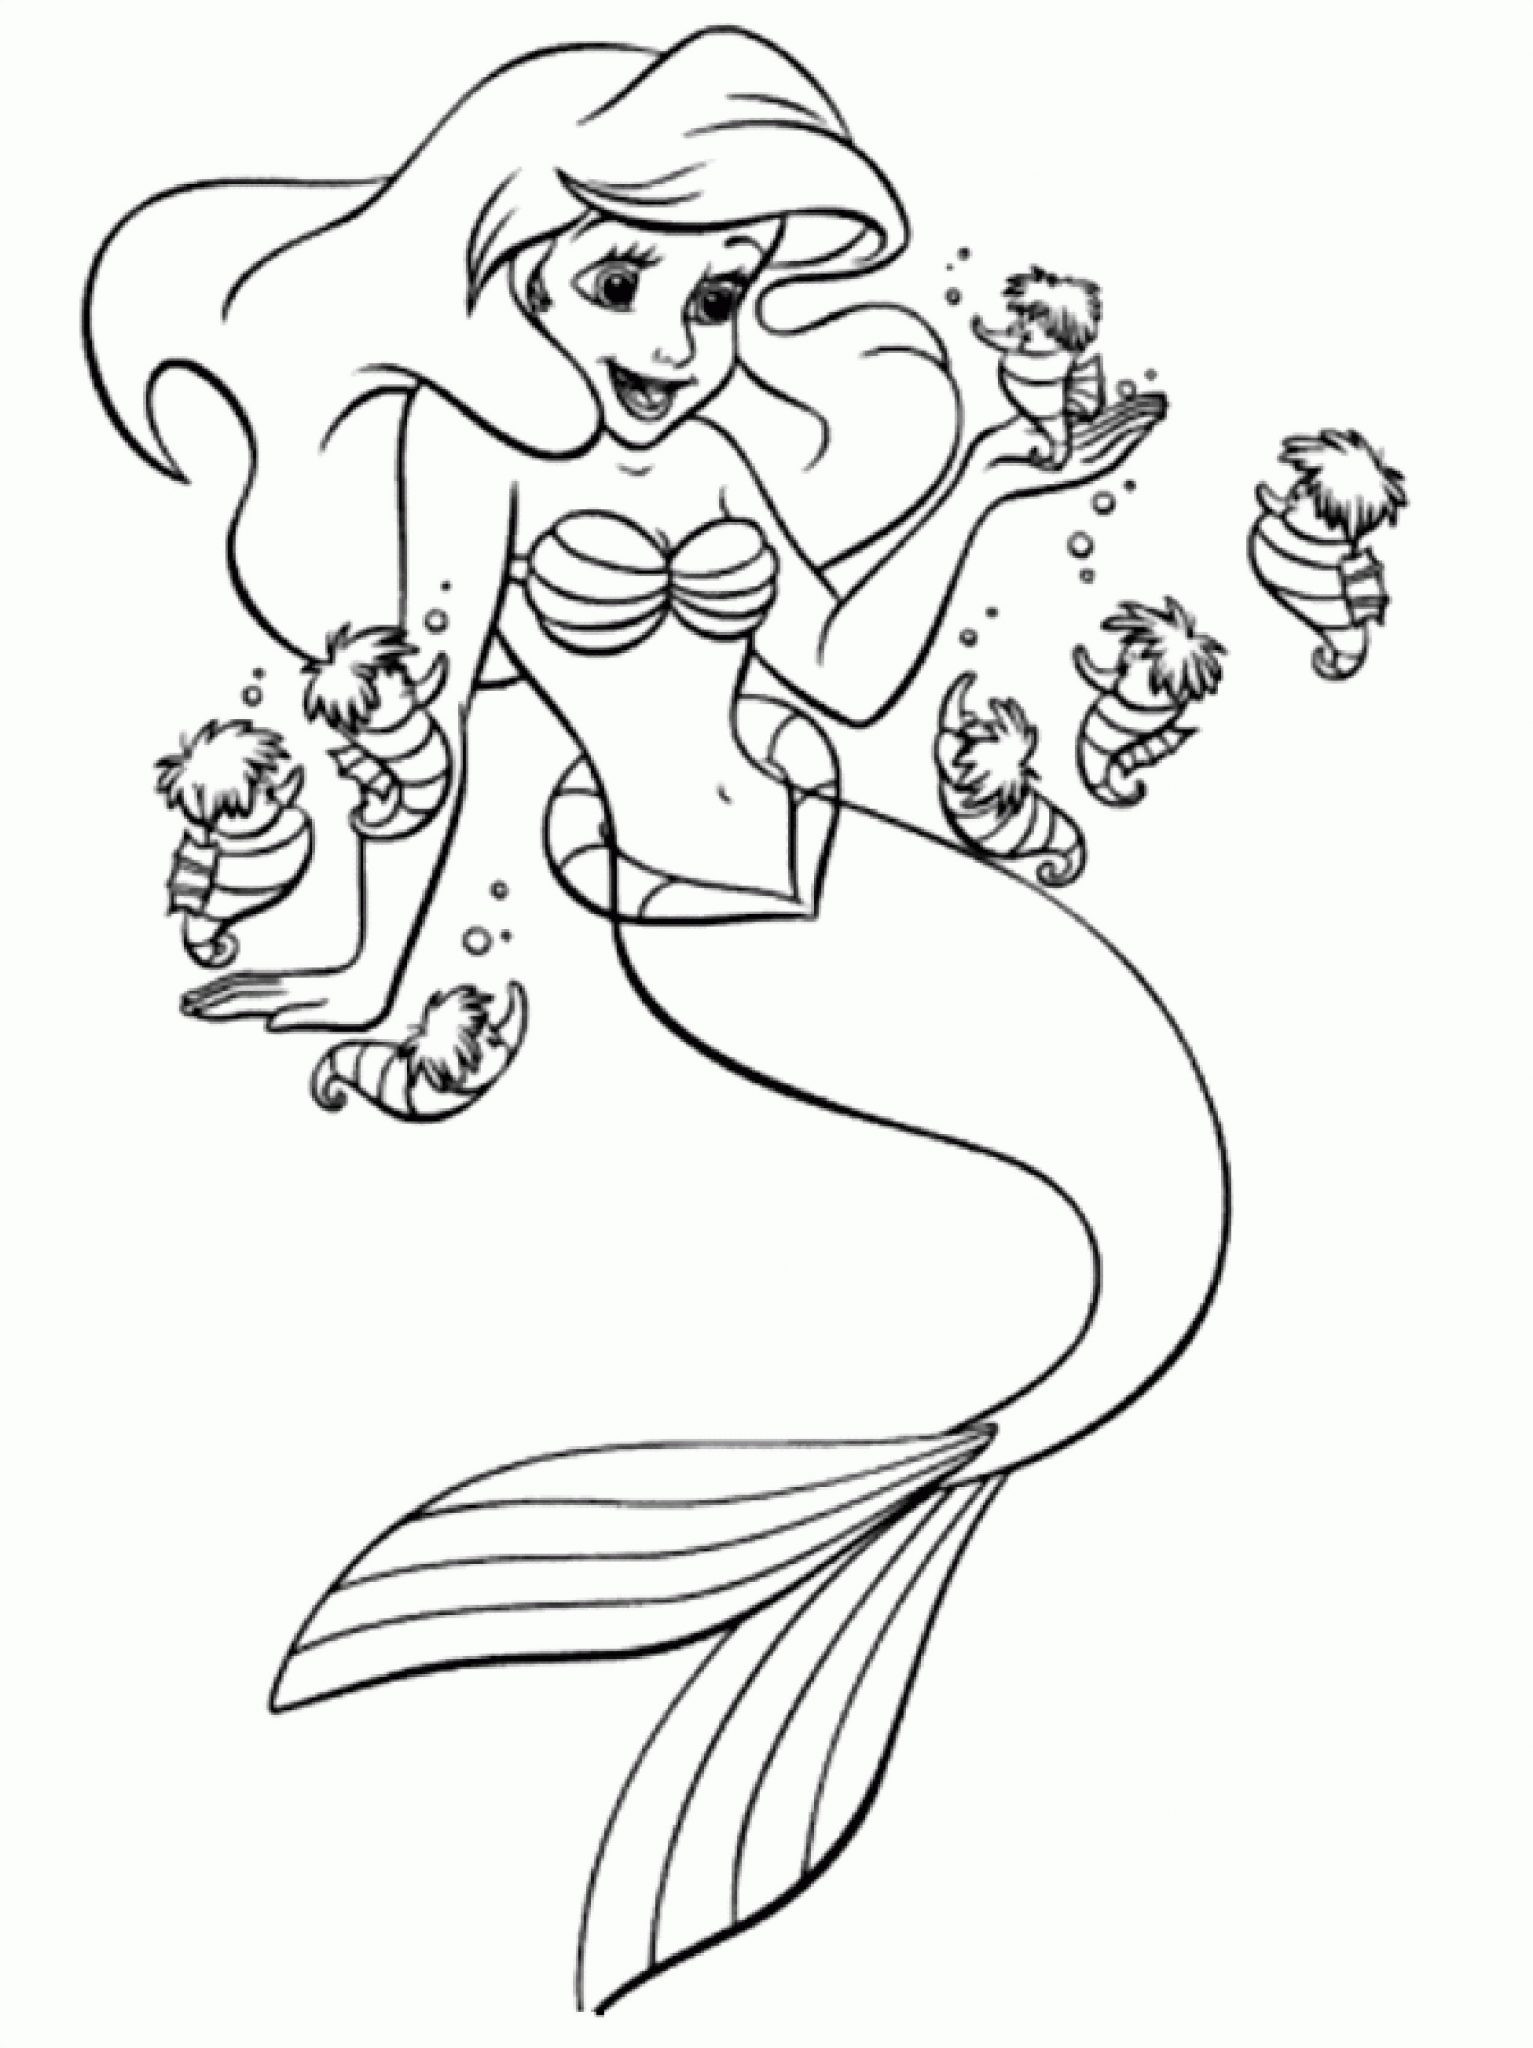 Disney Coloring Pages For Kids
 Disney Coloring Pages For Your Children